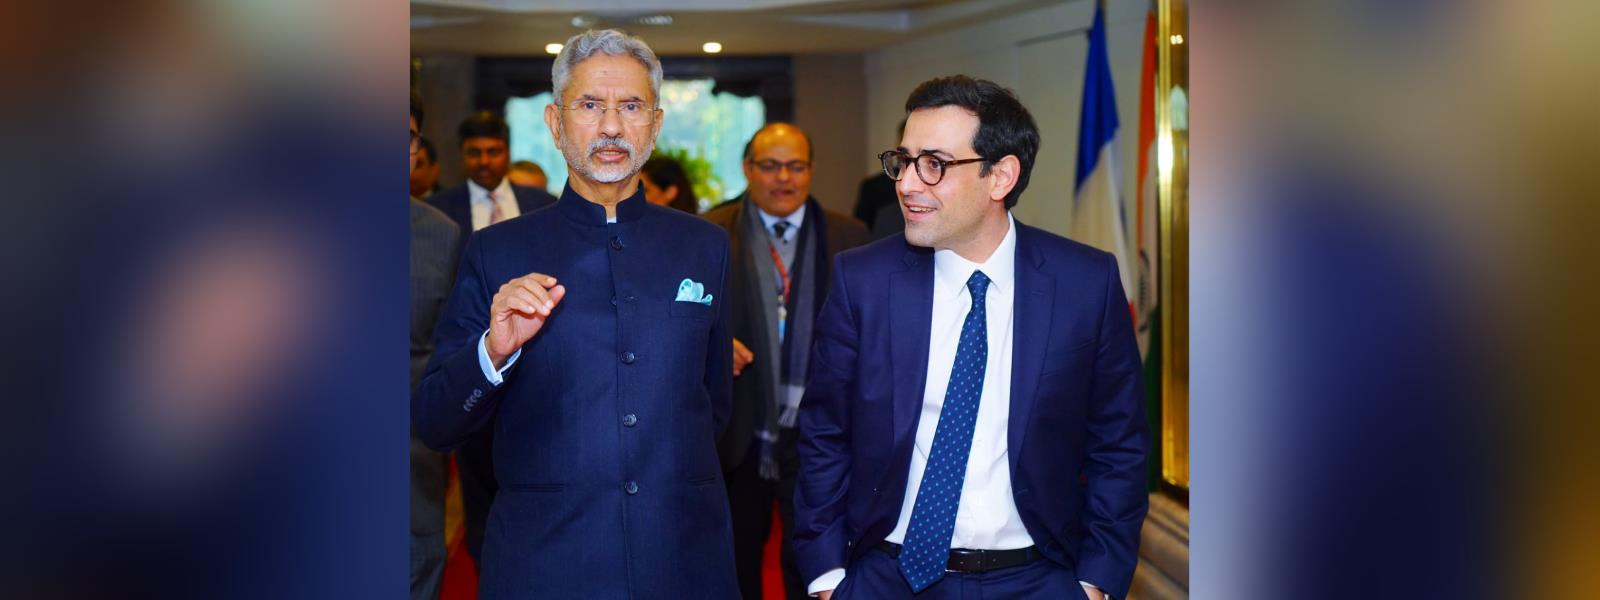 Ambassador of Portugal and Joint Secretary(EW), MEA at the…